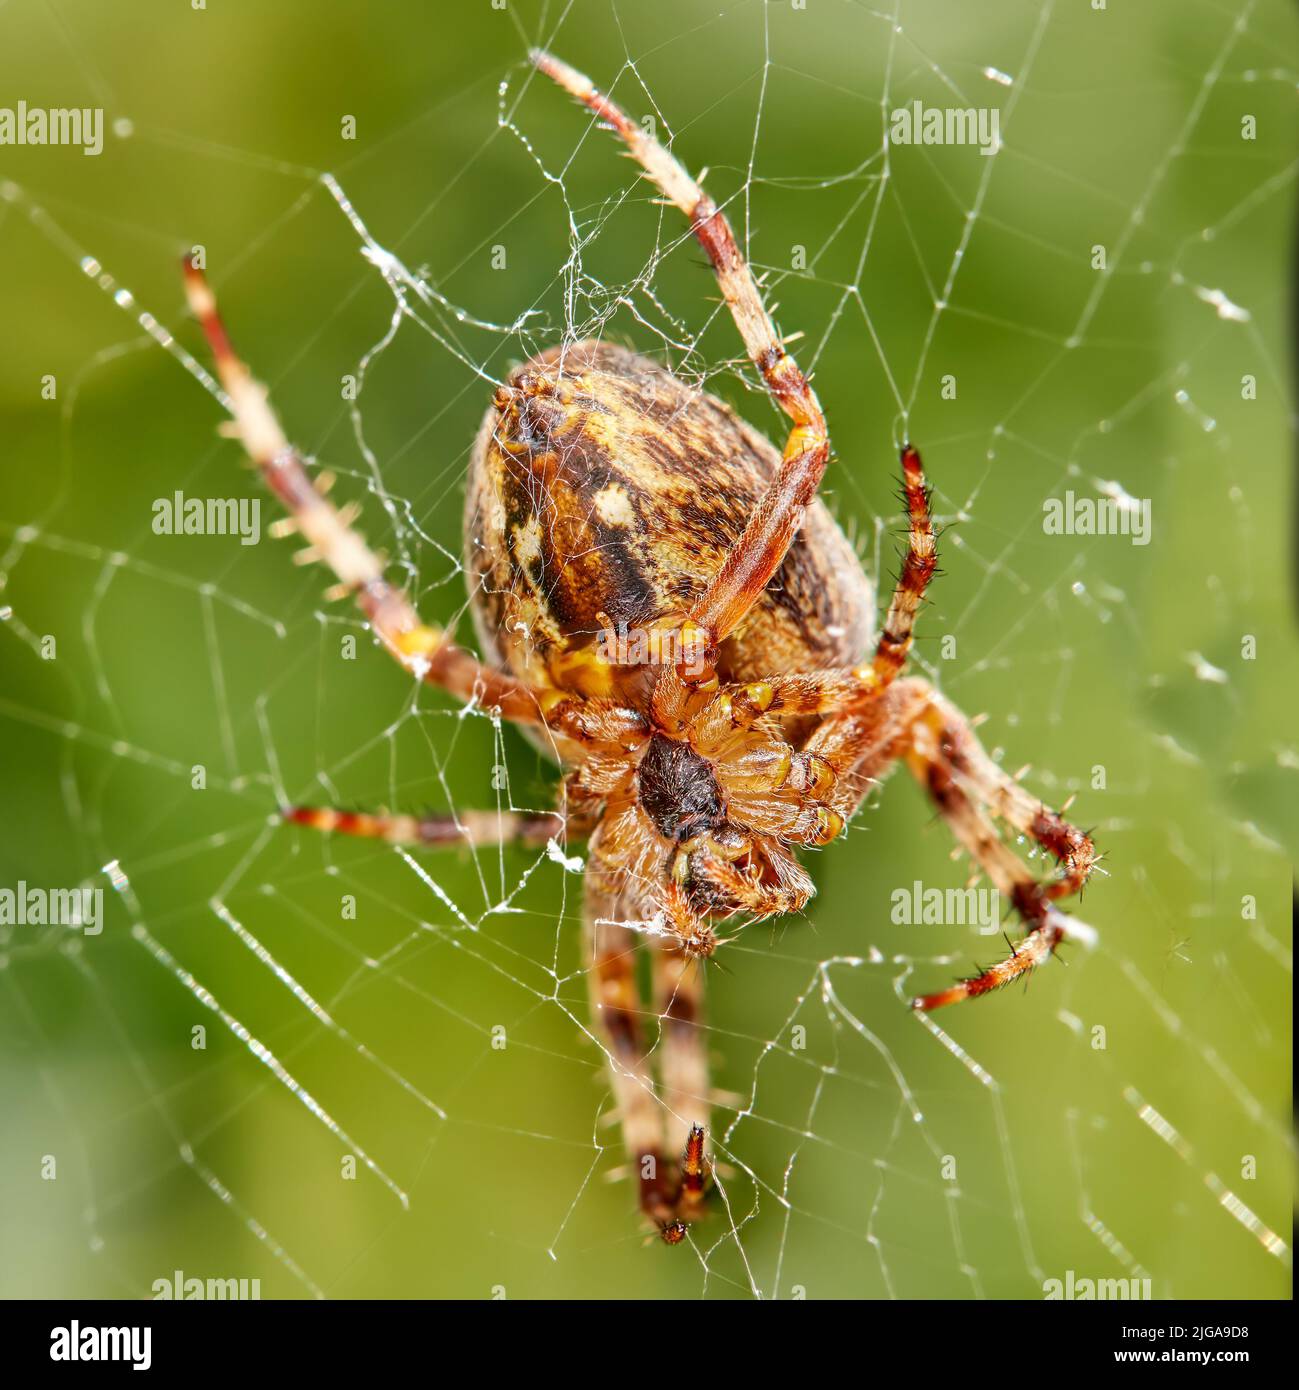 Closeup of a Walnut Orb Weaver spider in a web against blur leafy background in its natural habitat. An eight legged arachnid making a cobweb in Stock Photo